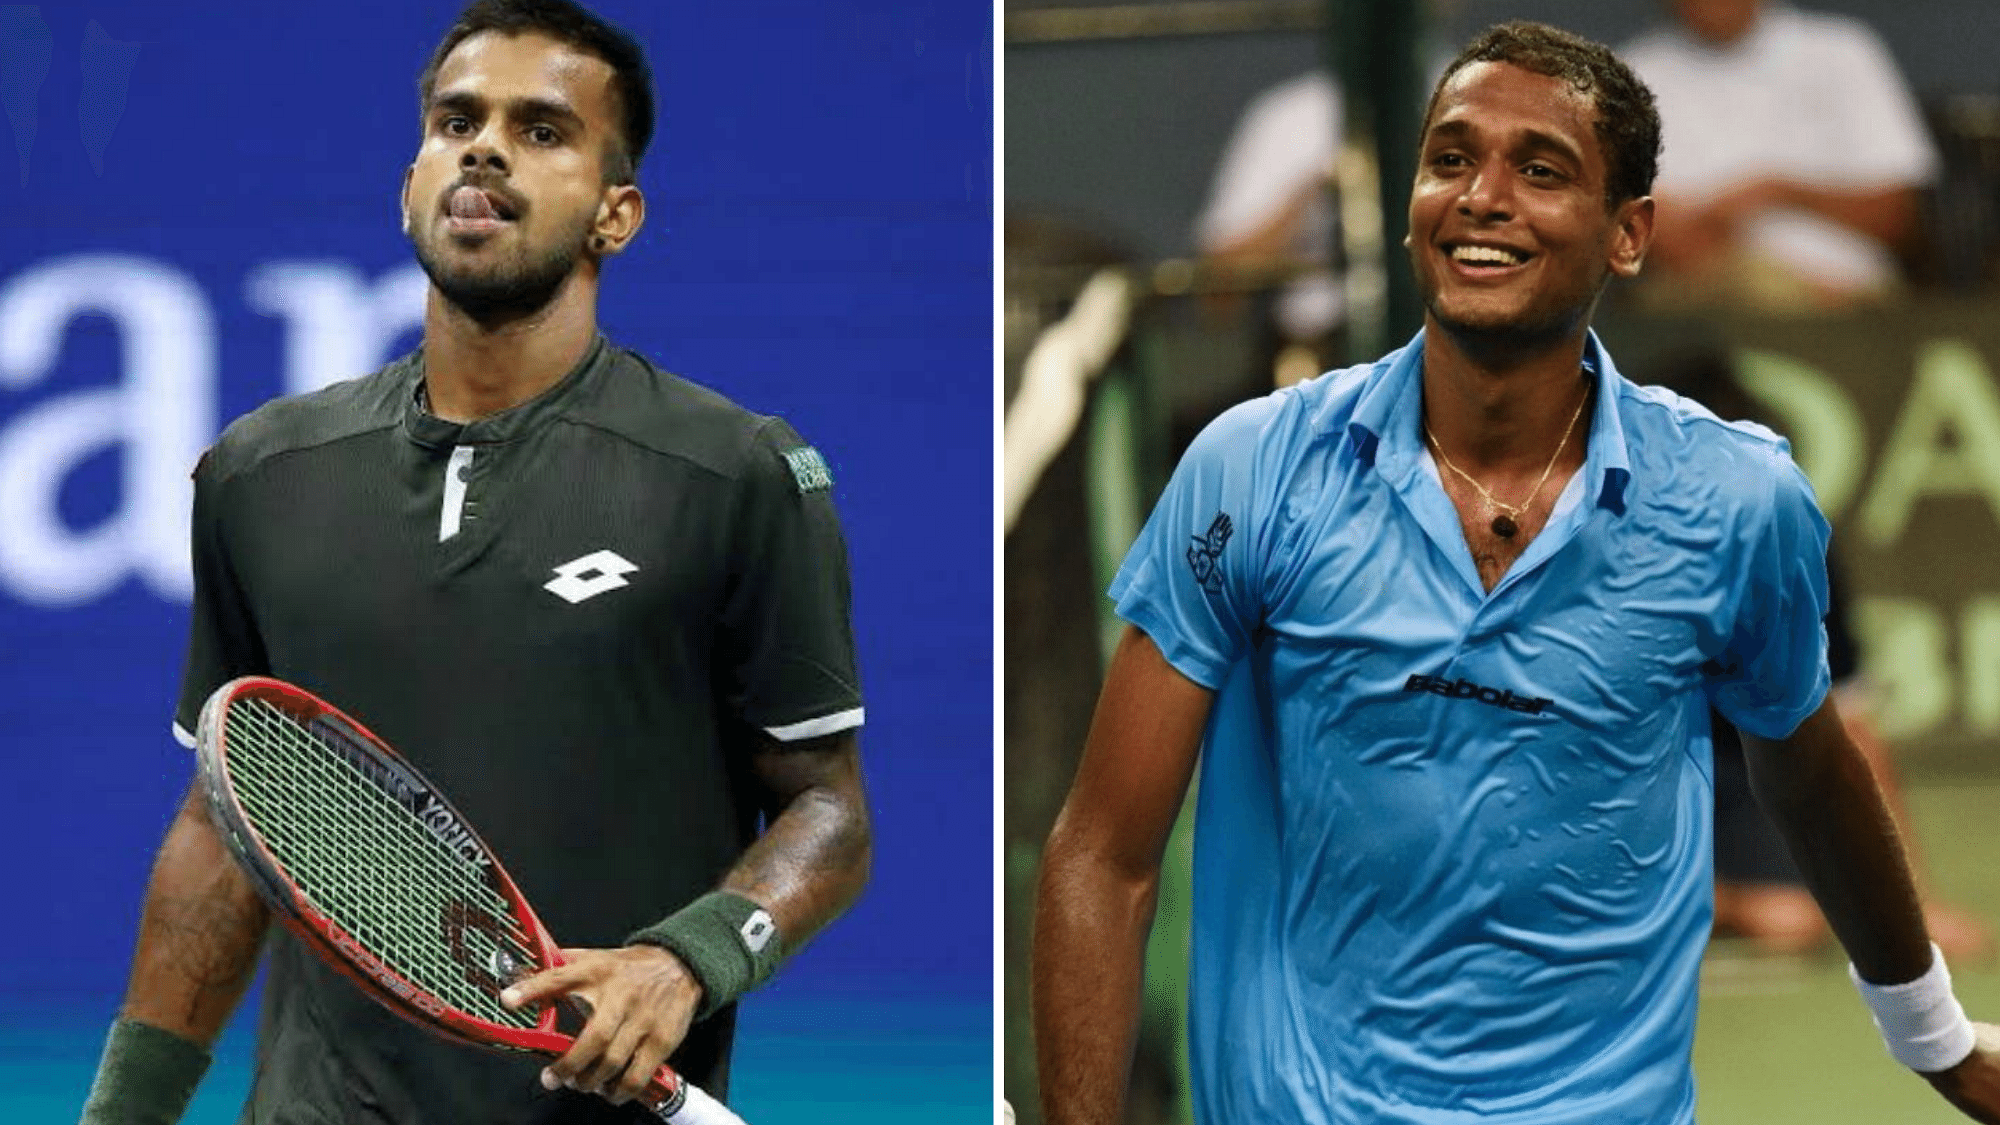 With both Sumit Nagal (left) and Ramkumar Ramanathan now available, India will have its best singles players taking on Pakistan.